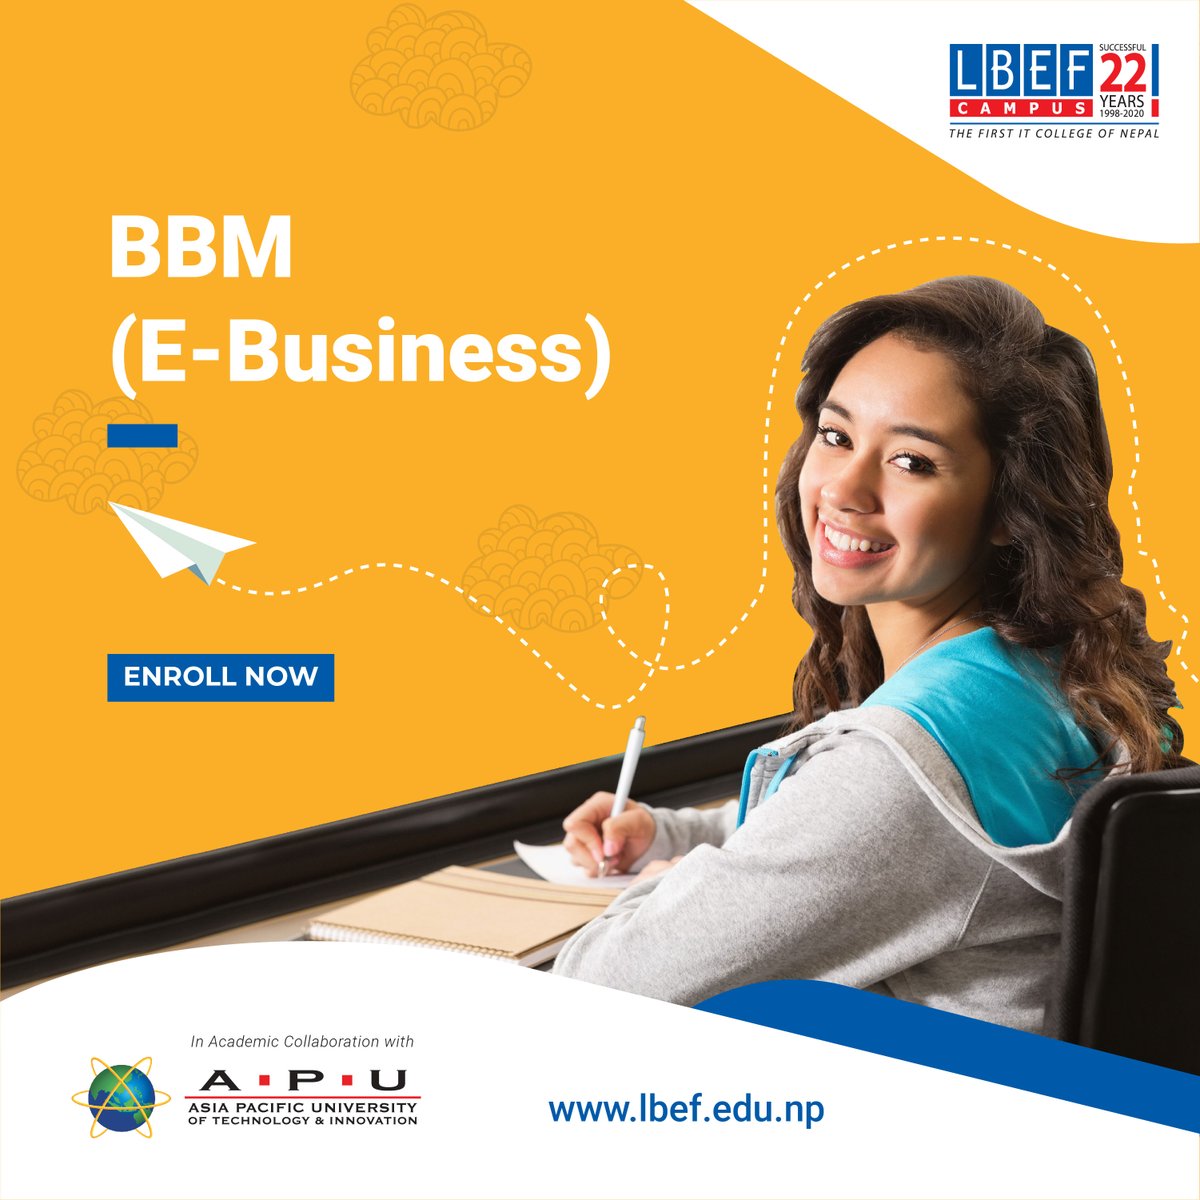 LBEF Campus welcomes all the 10+2 science and management graduates to enrol in BBM (E-business) programme.
For more information, reach us at:
Phone: 01-4444356
LBEF Campus, Maitidevi, Kathmandu
#LBEF #LBEFCAMPUS #educationforall #BBM #enhanceCarrer #leadinguniversity